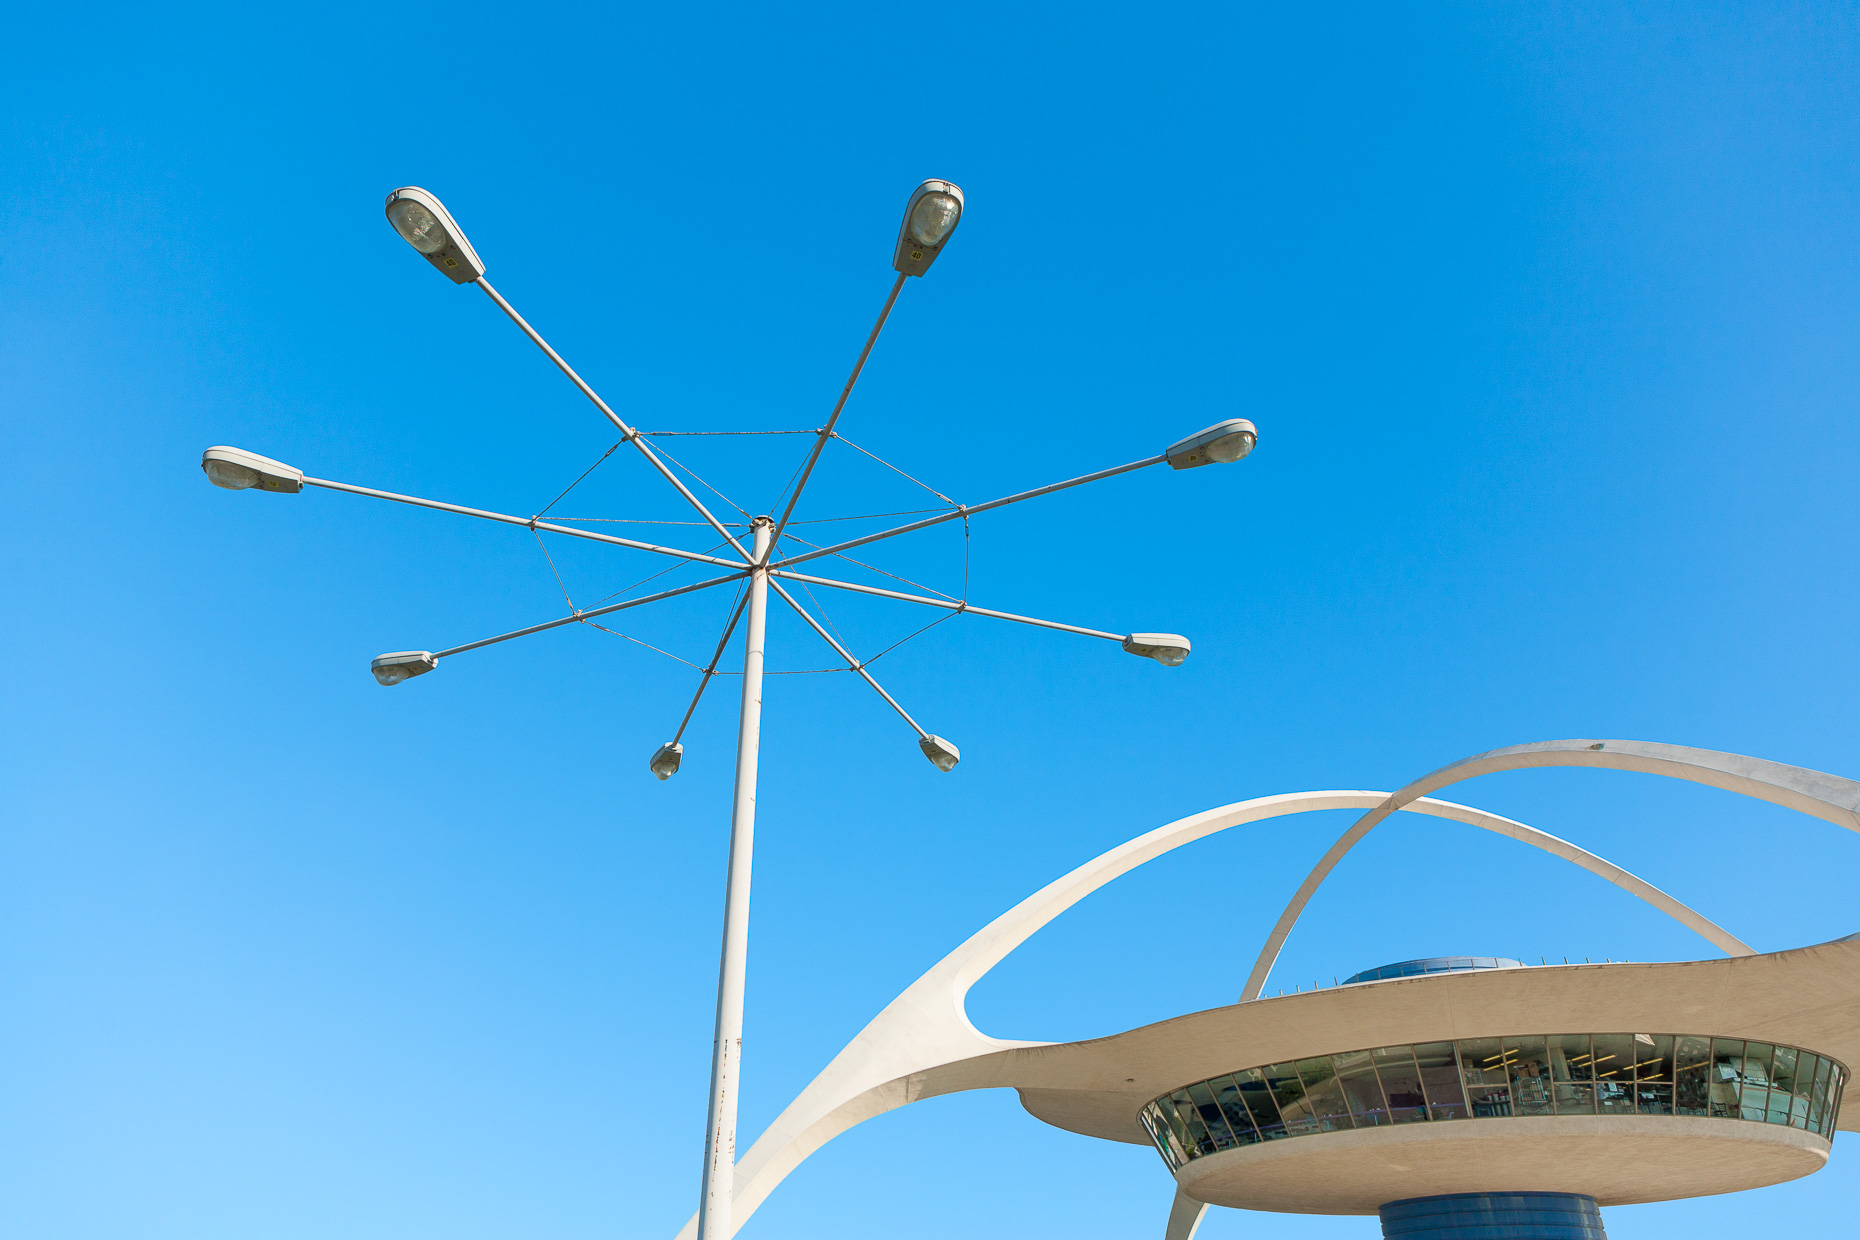 Midcentury modern Theme Building with street light against sky at Los Angeles International Airport. Architecture.  David Zaitz Photography.